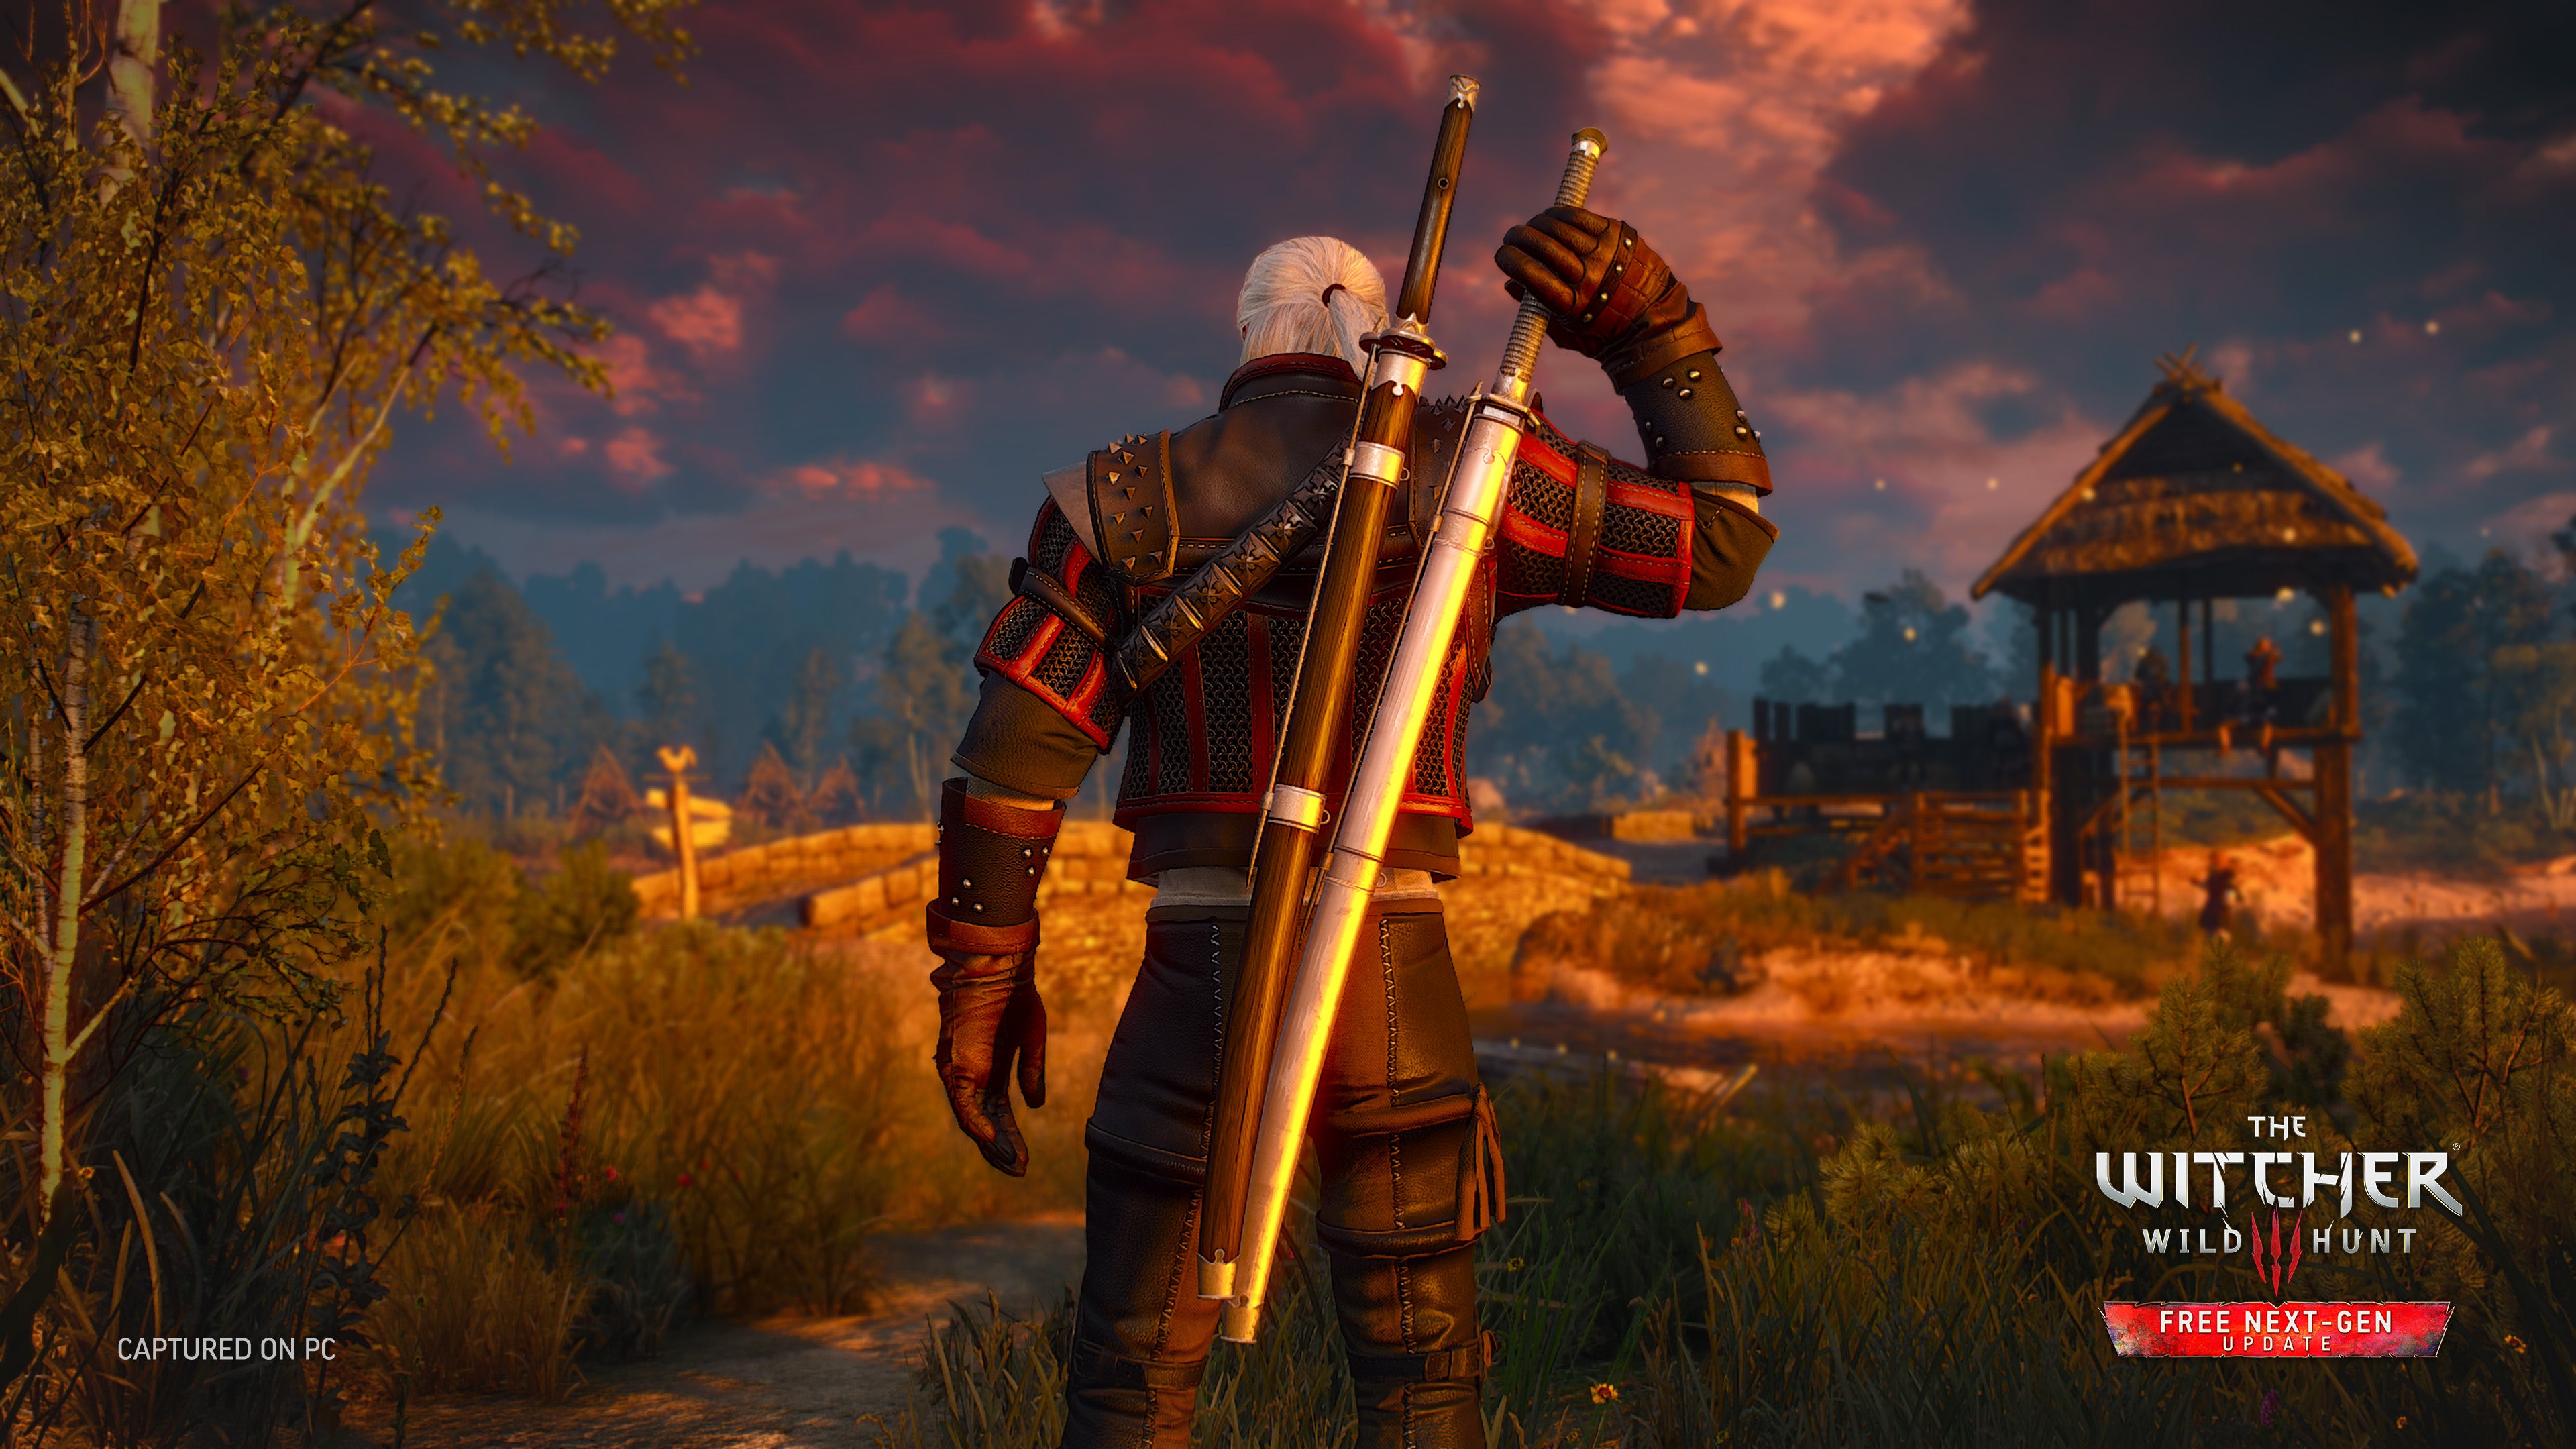 Geralt, back to the camera, lifts one of two Korean-style swords from his back. Someone's evening is about to get ruined.